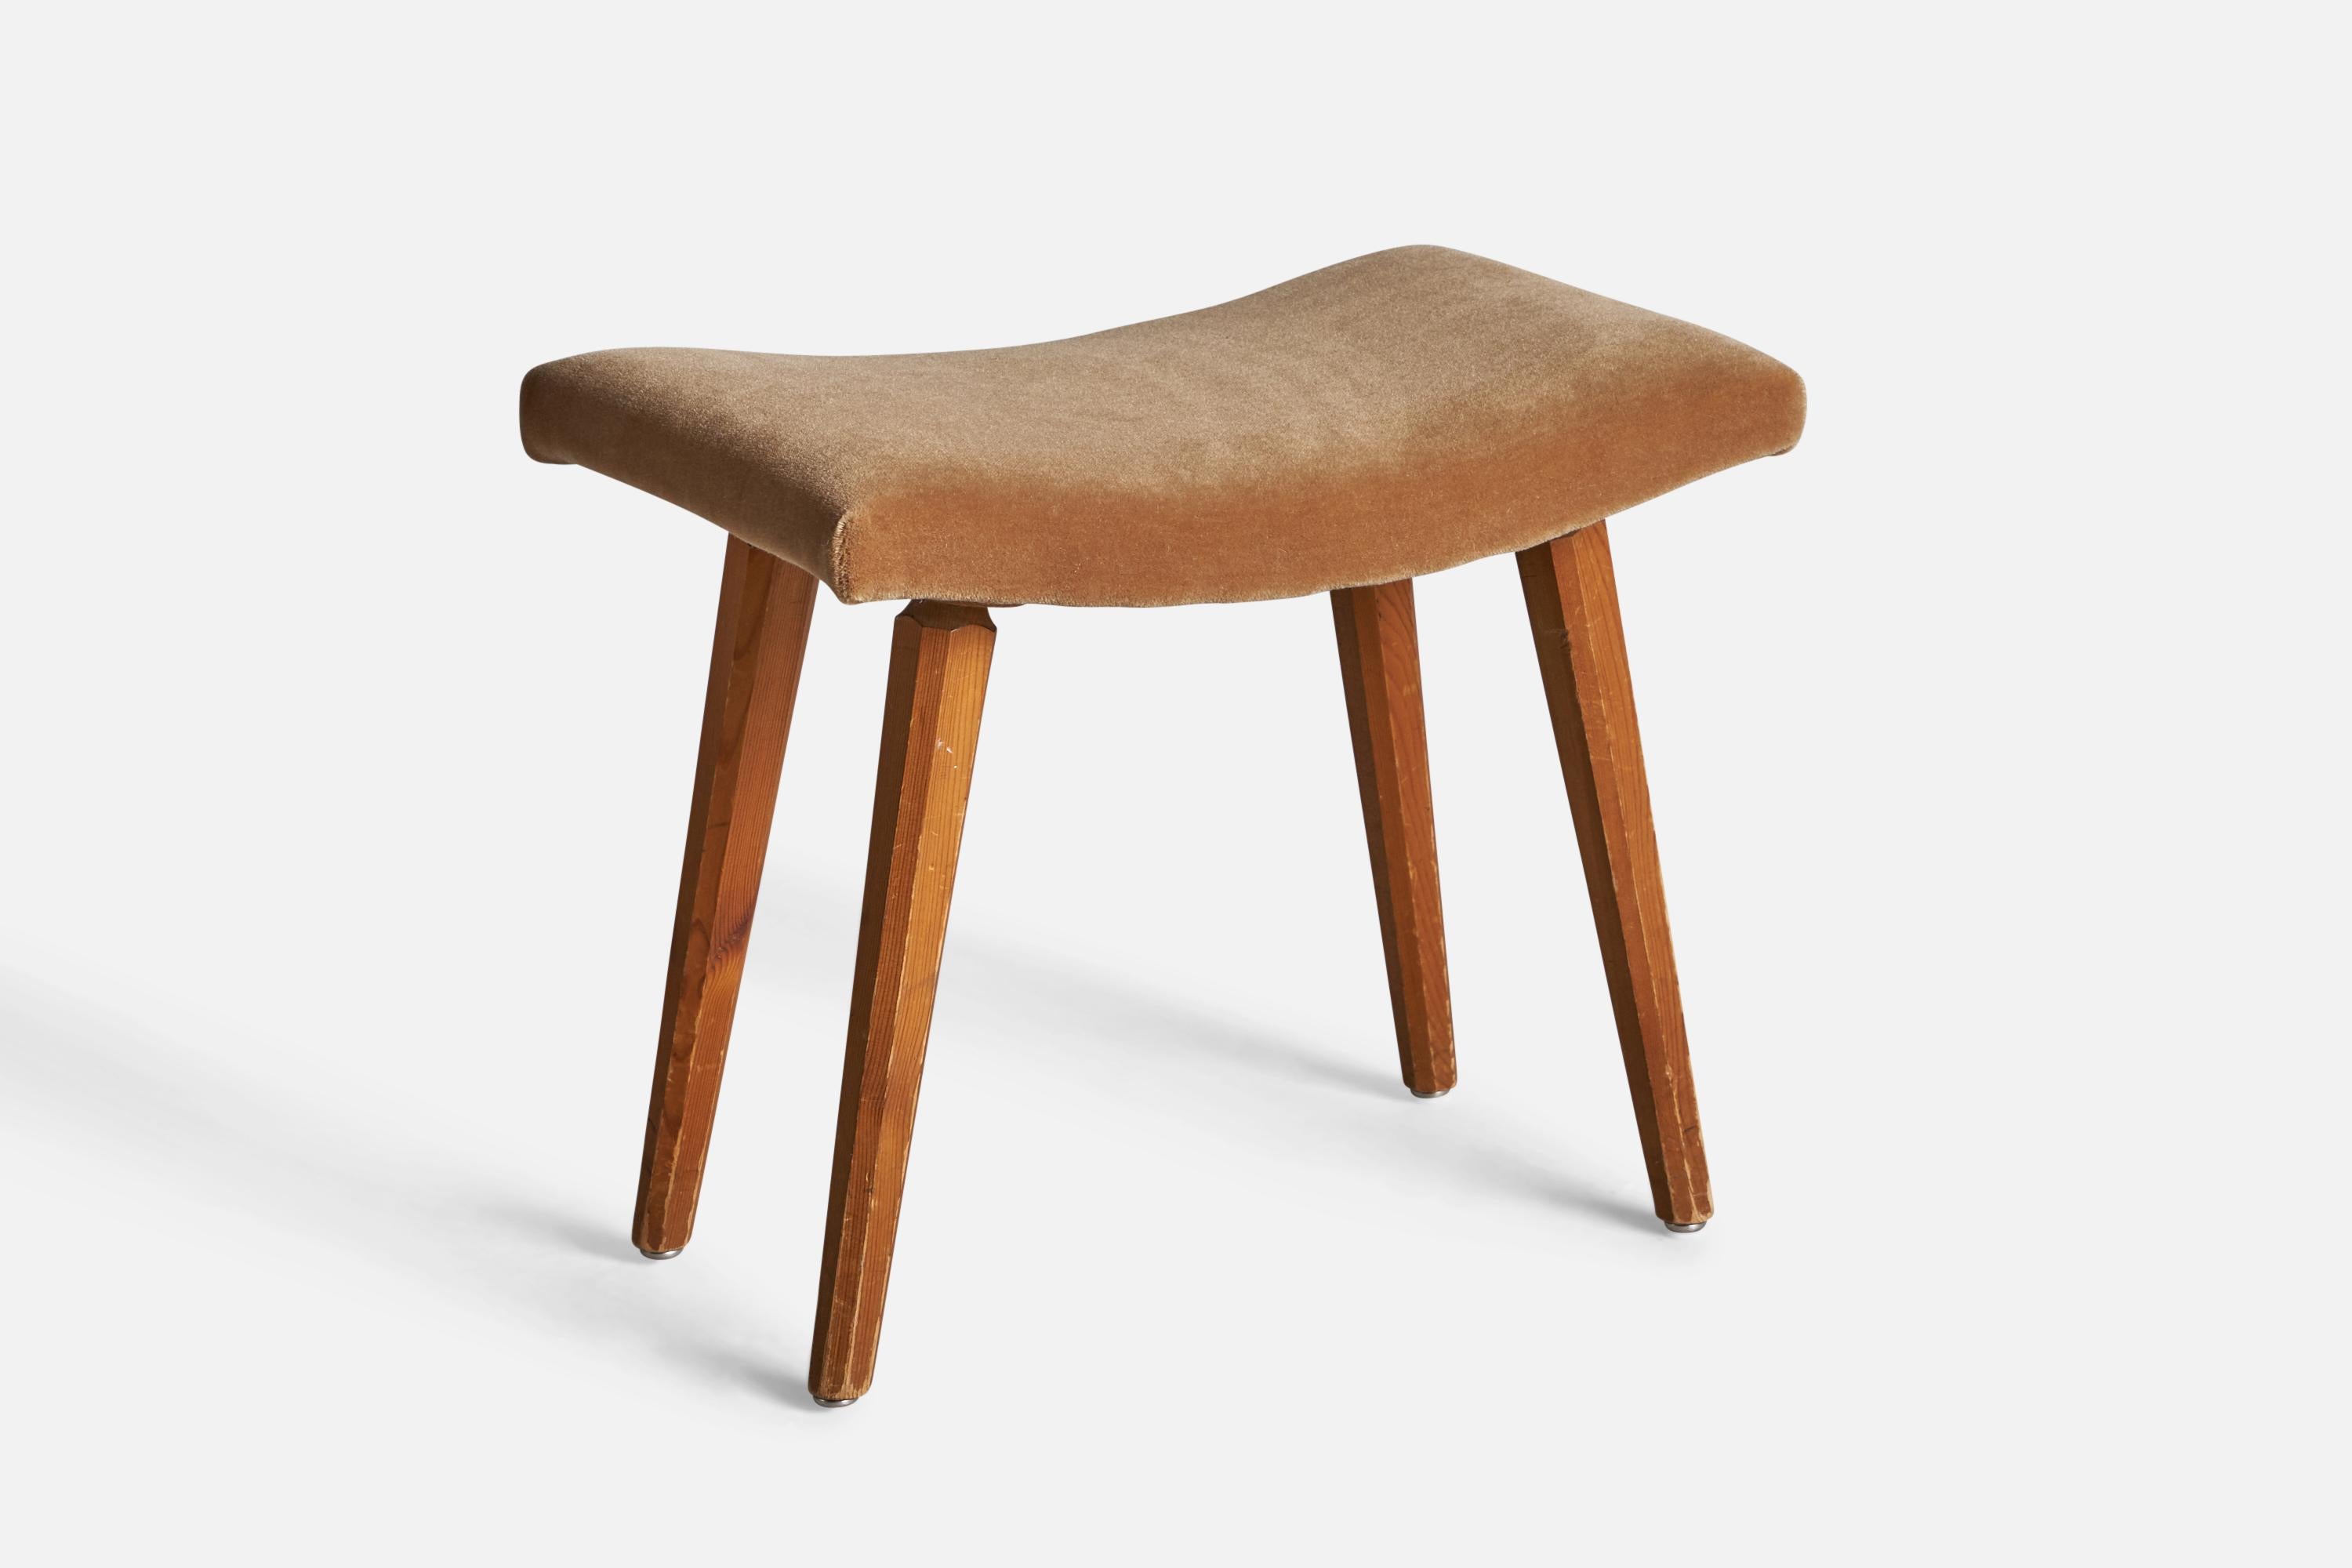 A solid pine and beige mohair stool, designed and produced in Sweden, 1940s.
